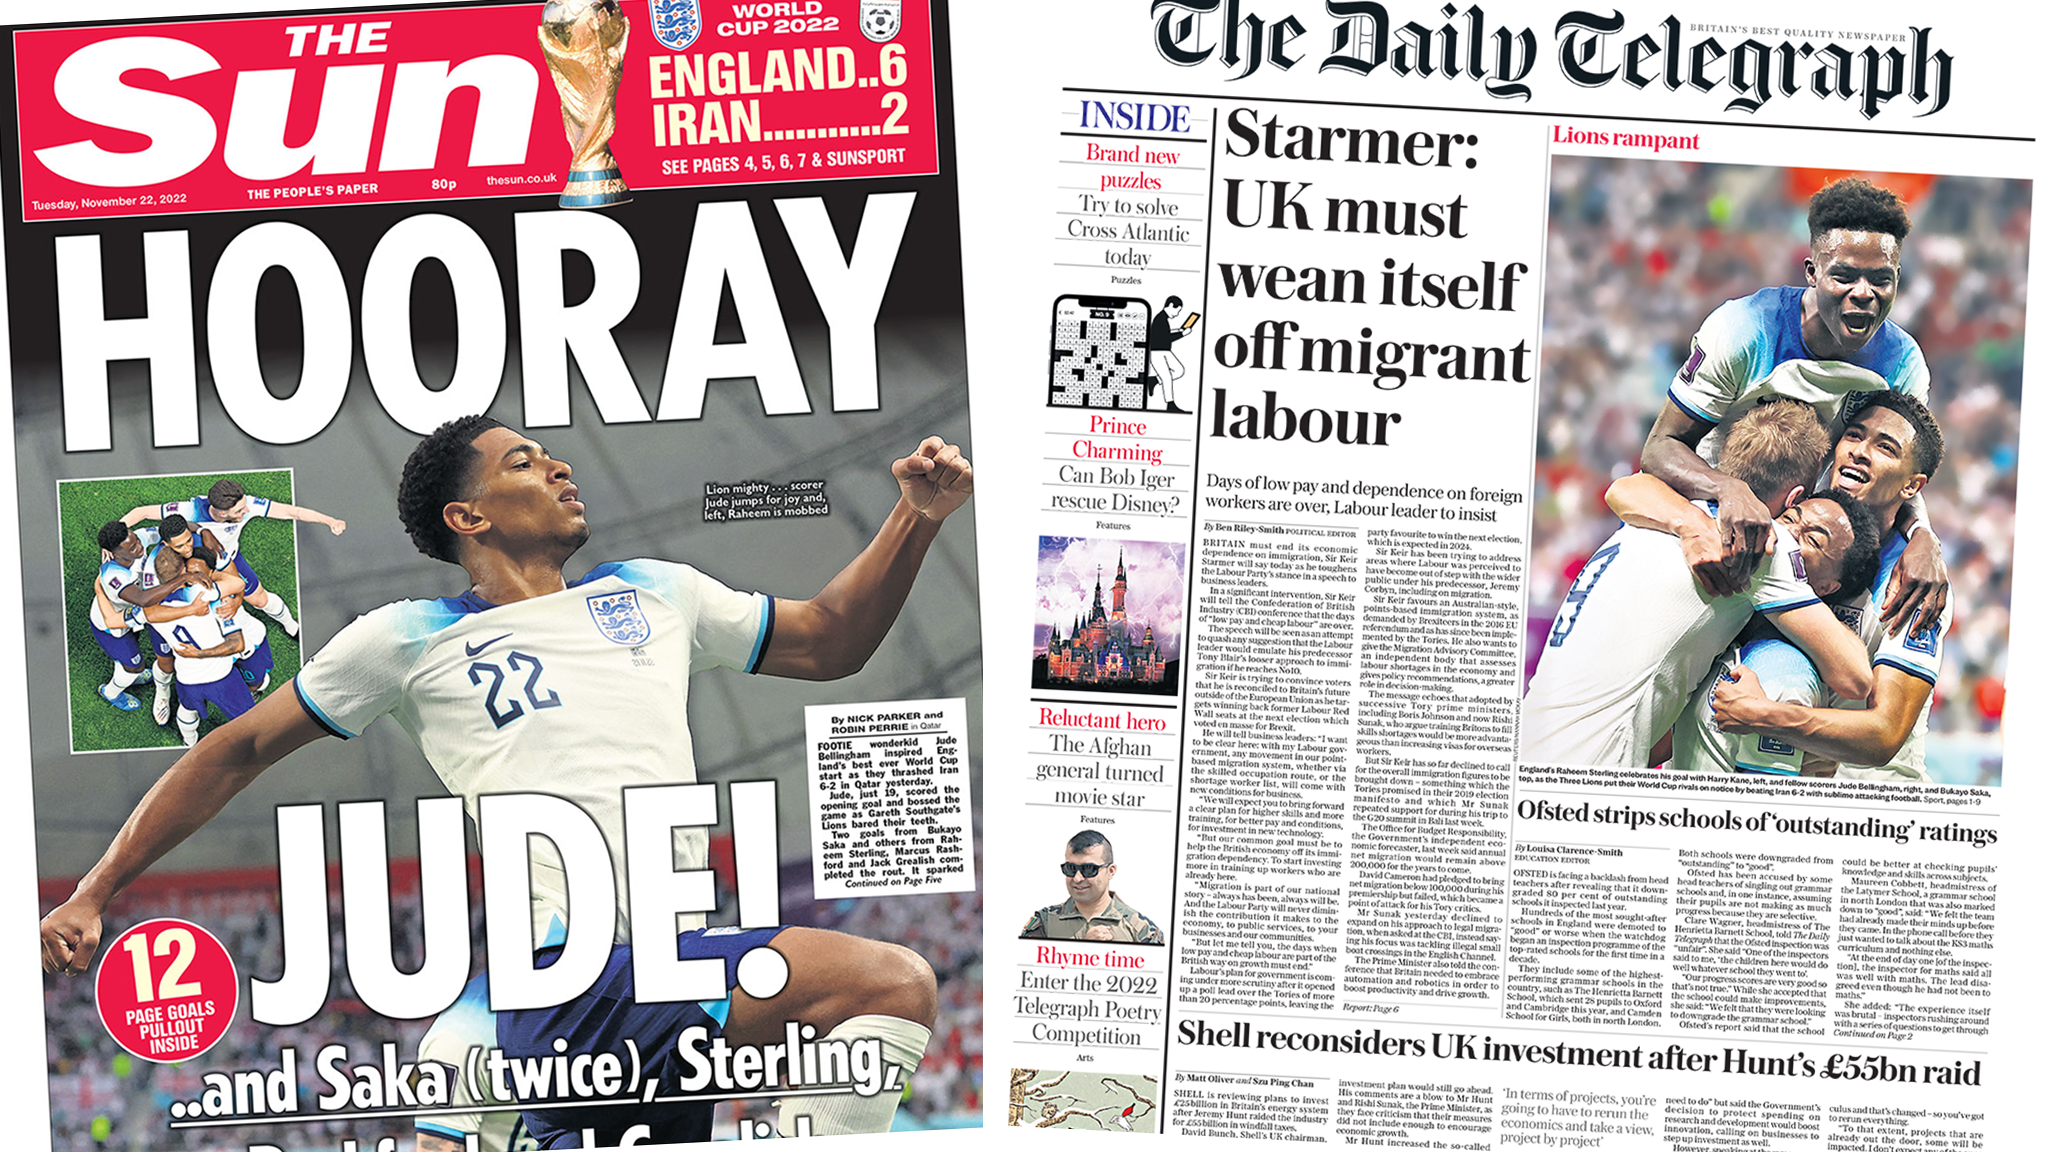 The headline in the Sun reads, "Hooray Jude! And Saka (twice), Sterling, Rashford and Grealish", while the headline in the Telegraph reads, "Starmer: UK must wean itself off migrant labour"